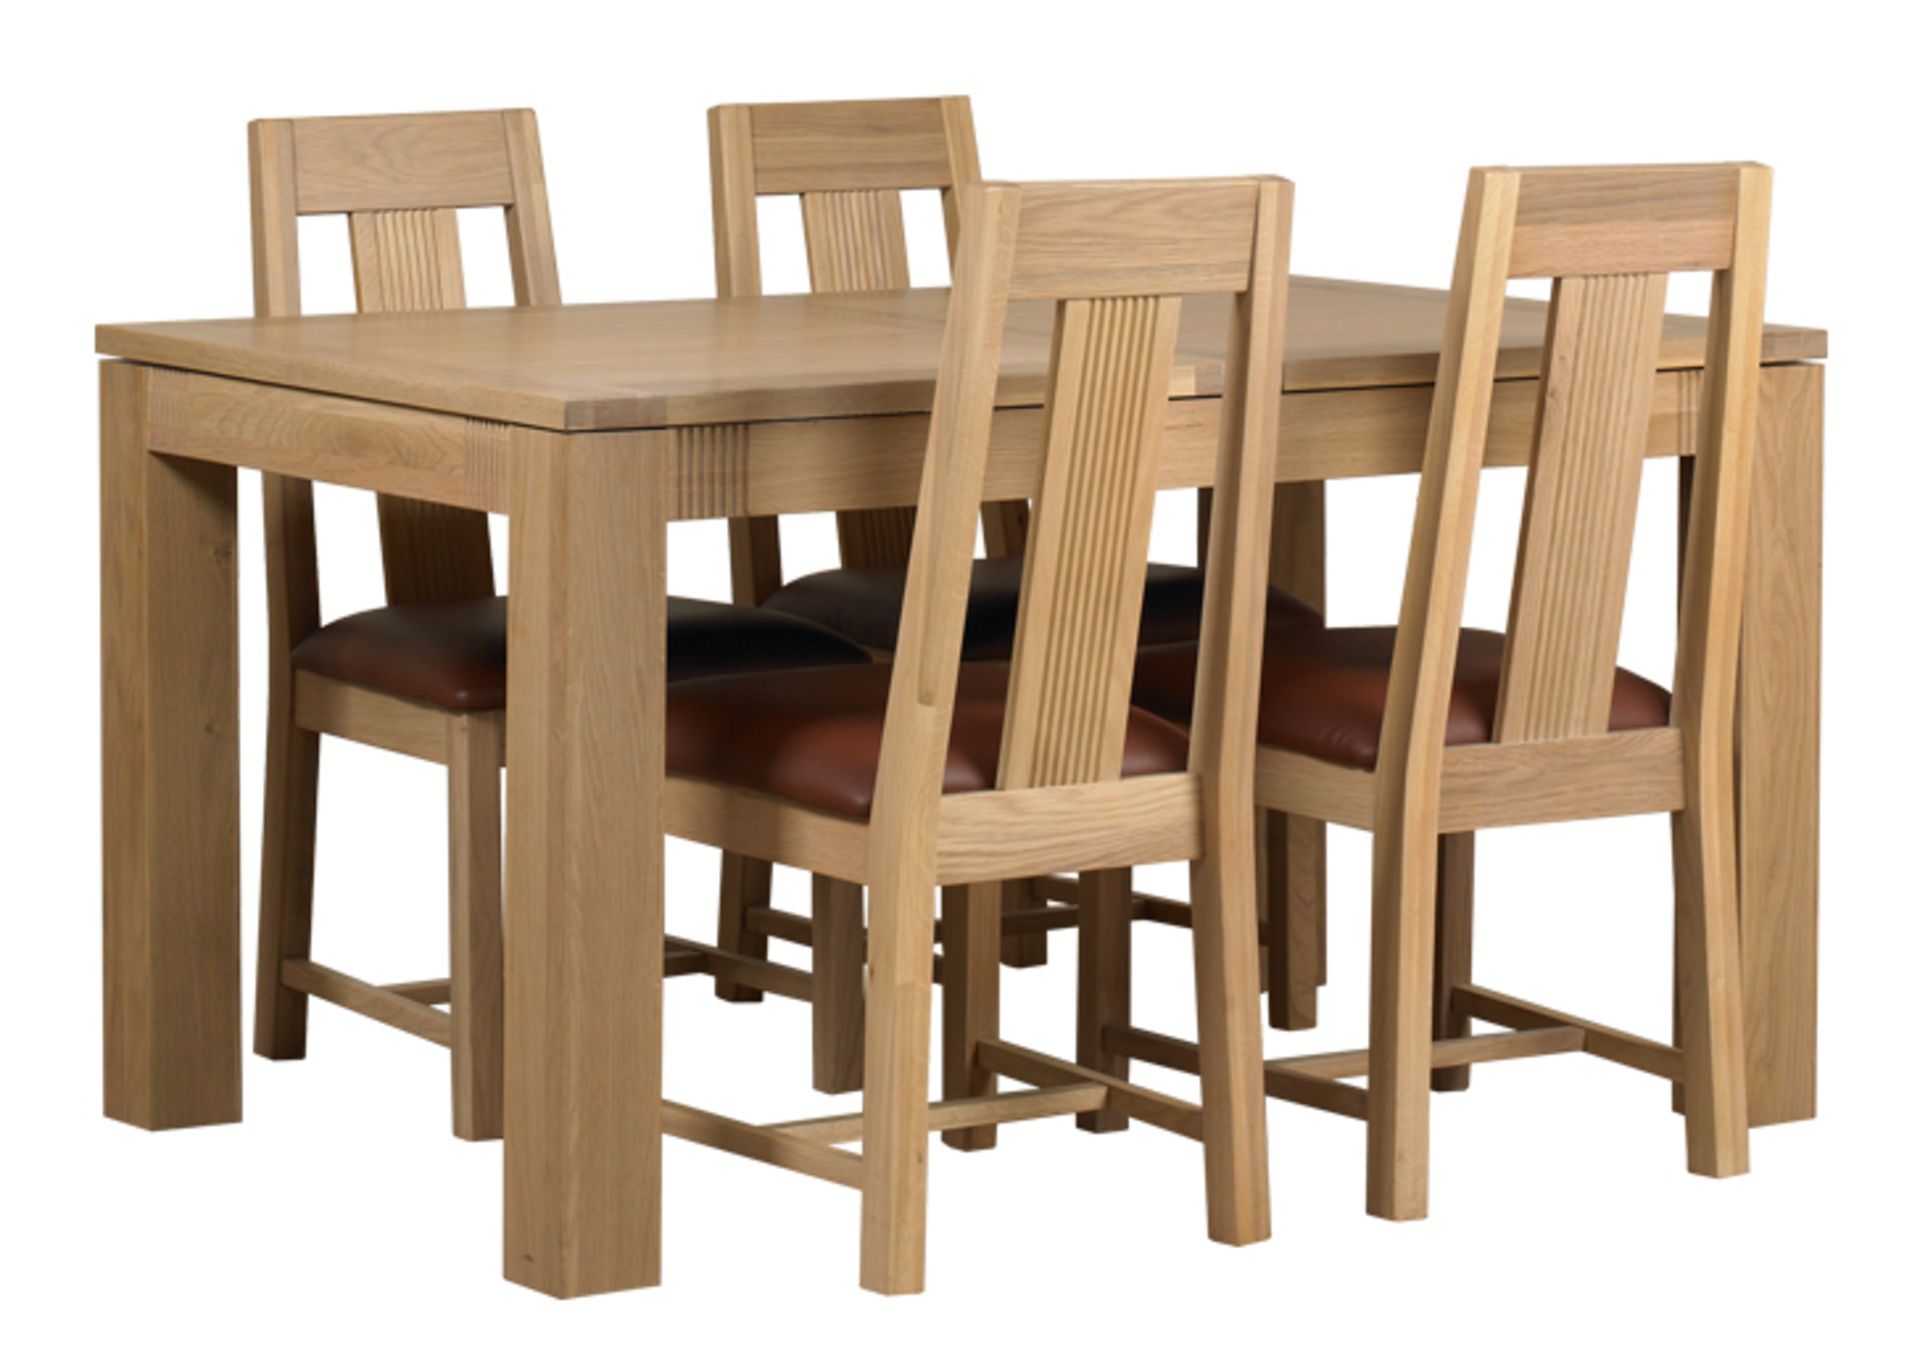 1 x Mark Webster Buckingham Small Extending Dining Table and Four High Back Chairs  - White Wash Oak